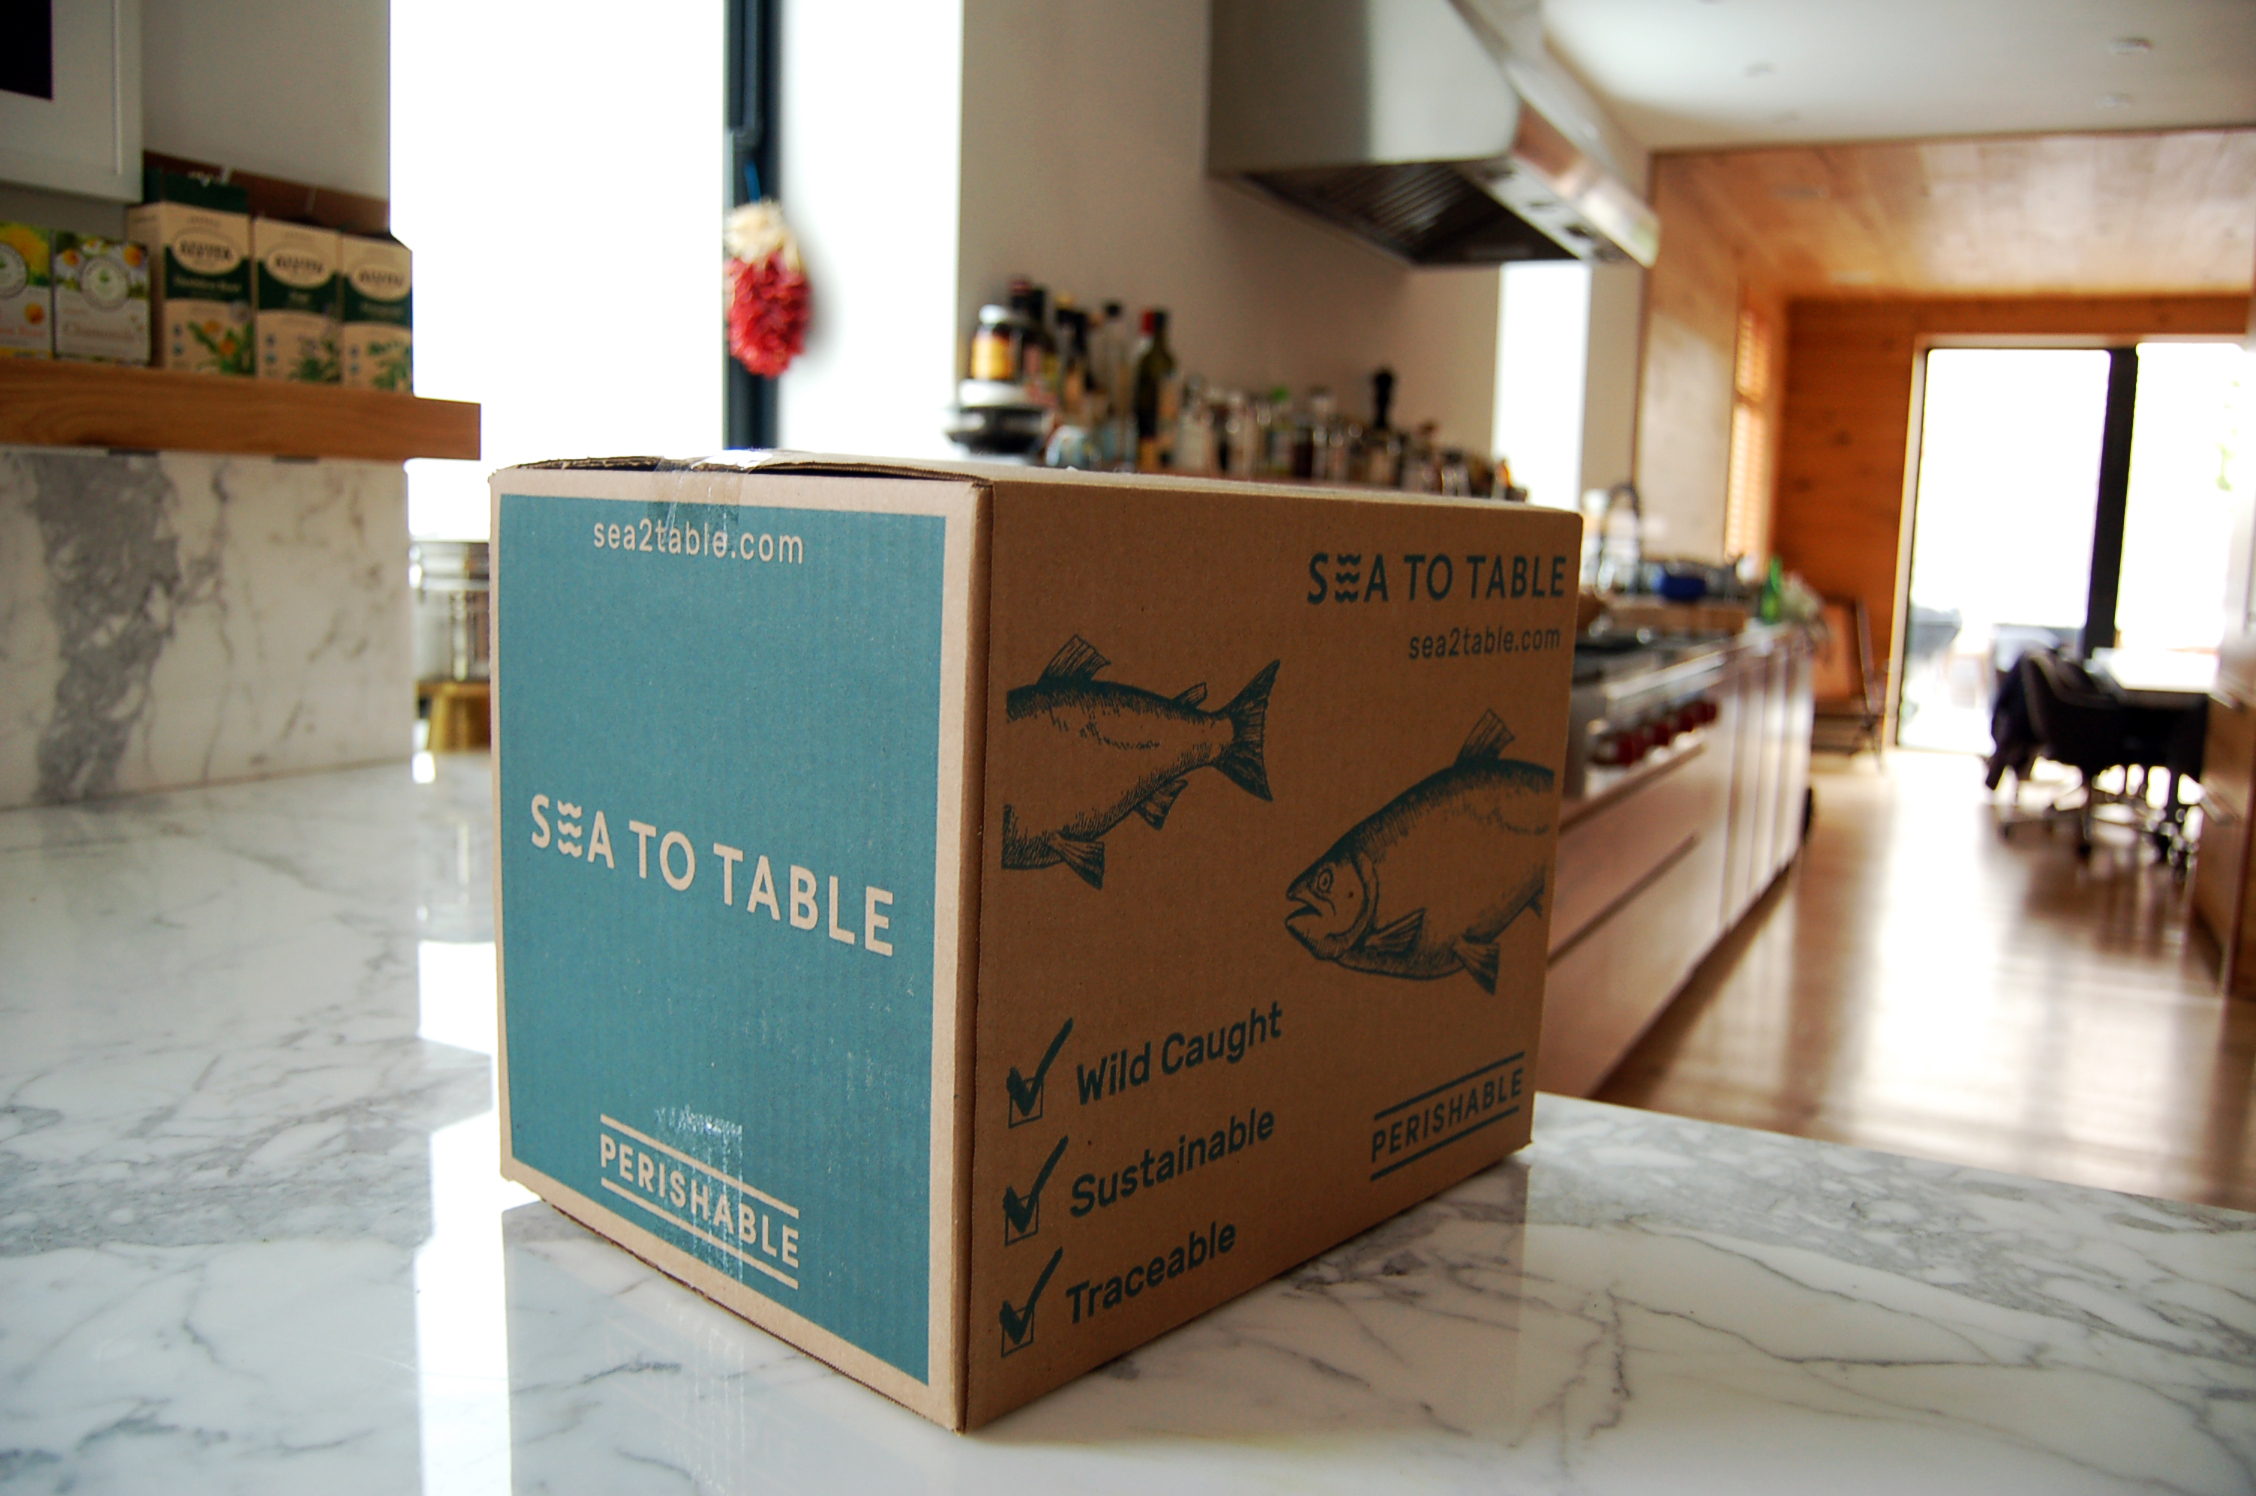 Sea to Table®’s standards mean that 100 percent of their seafood is wild-caught, sustainable, domestic, and traceable.